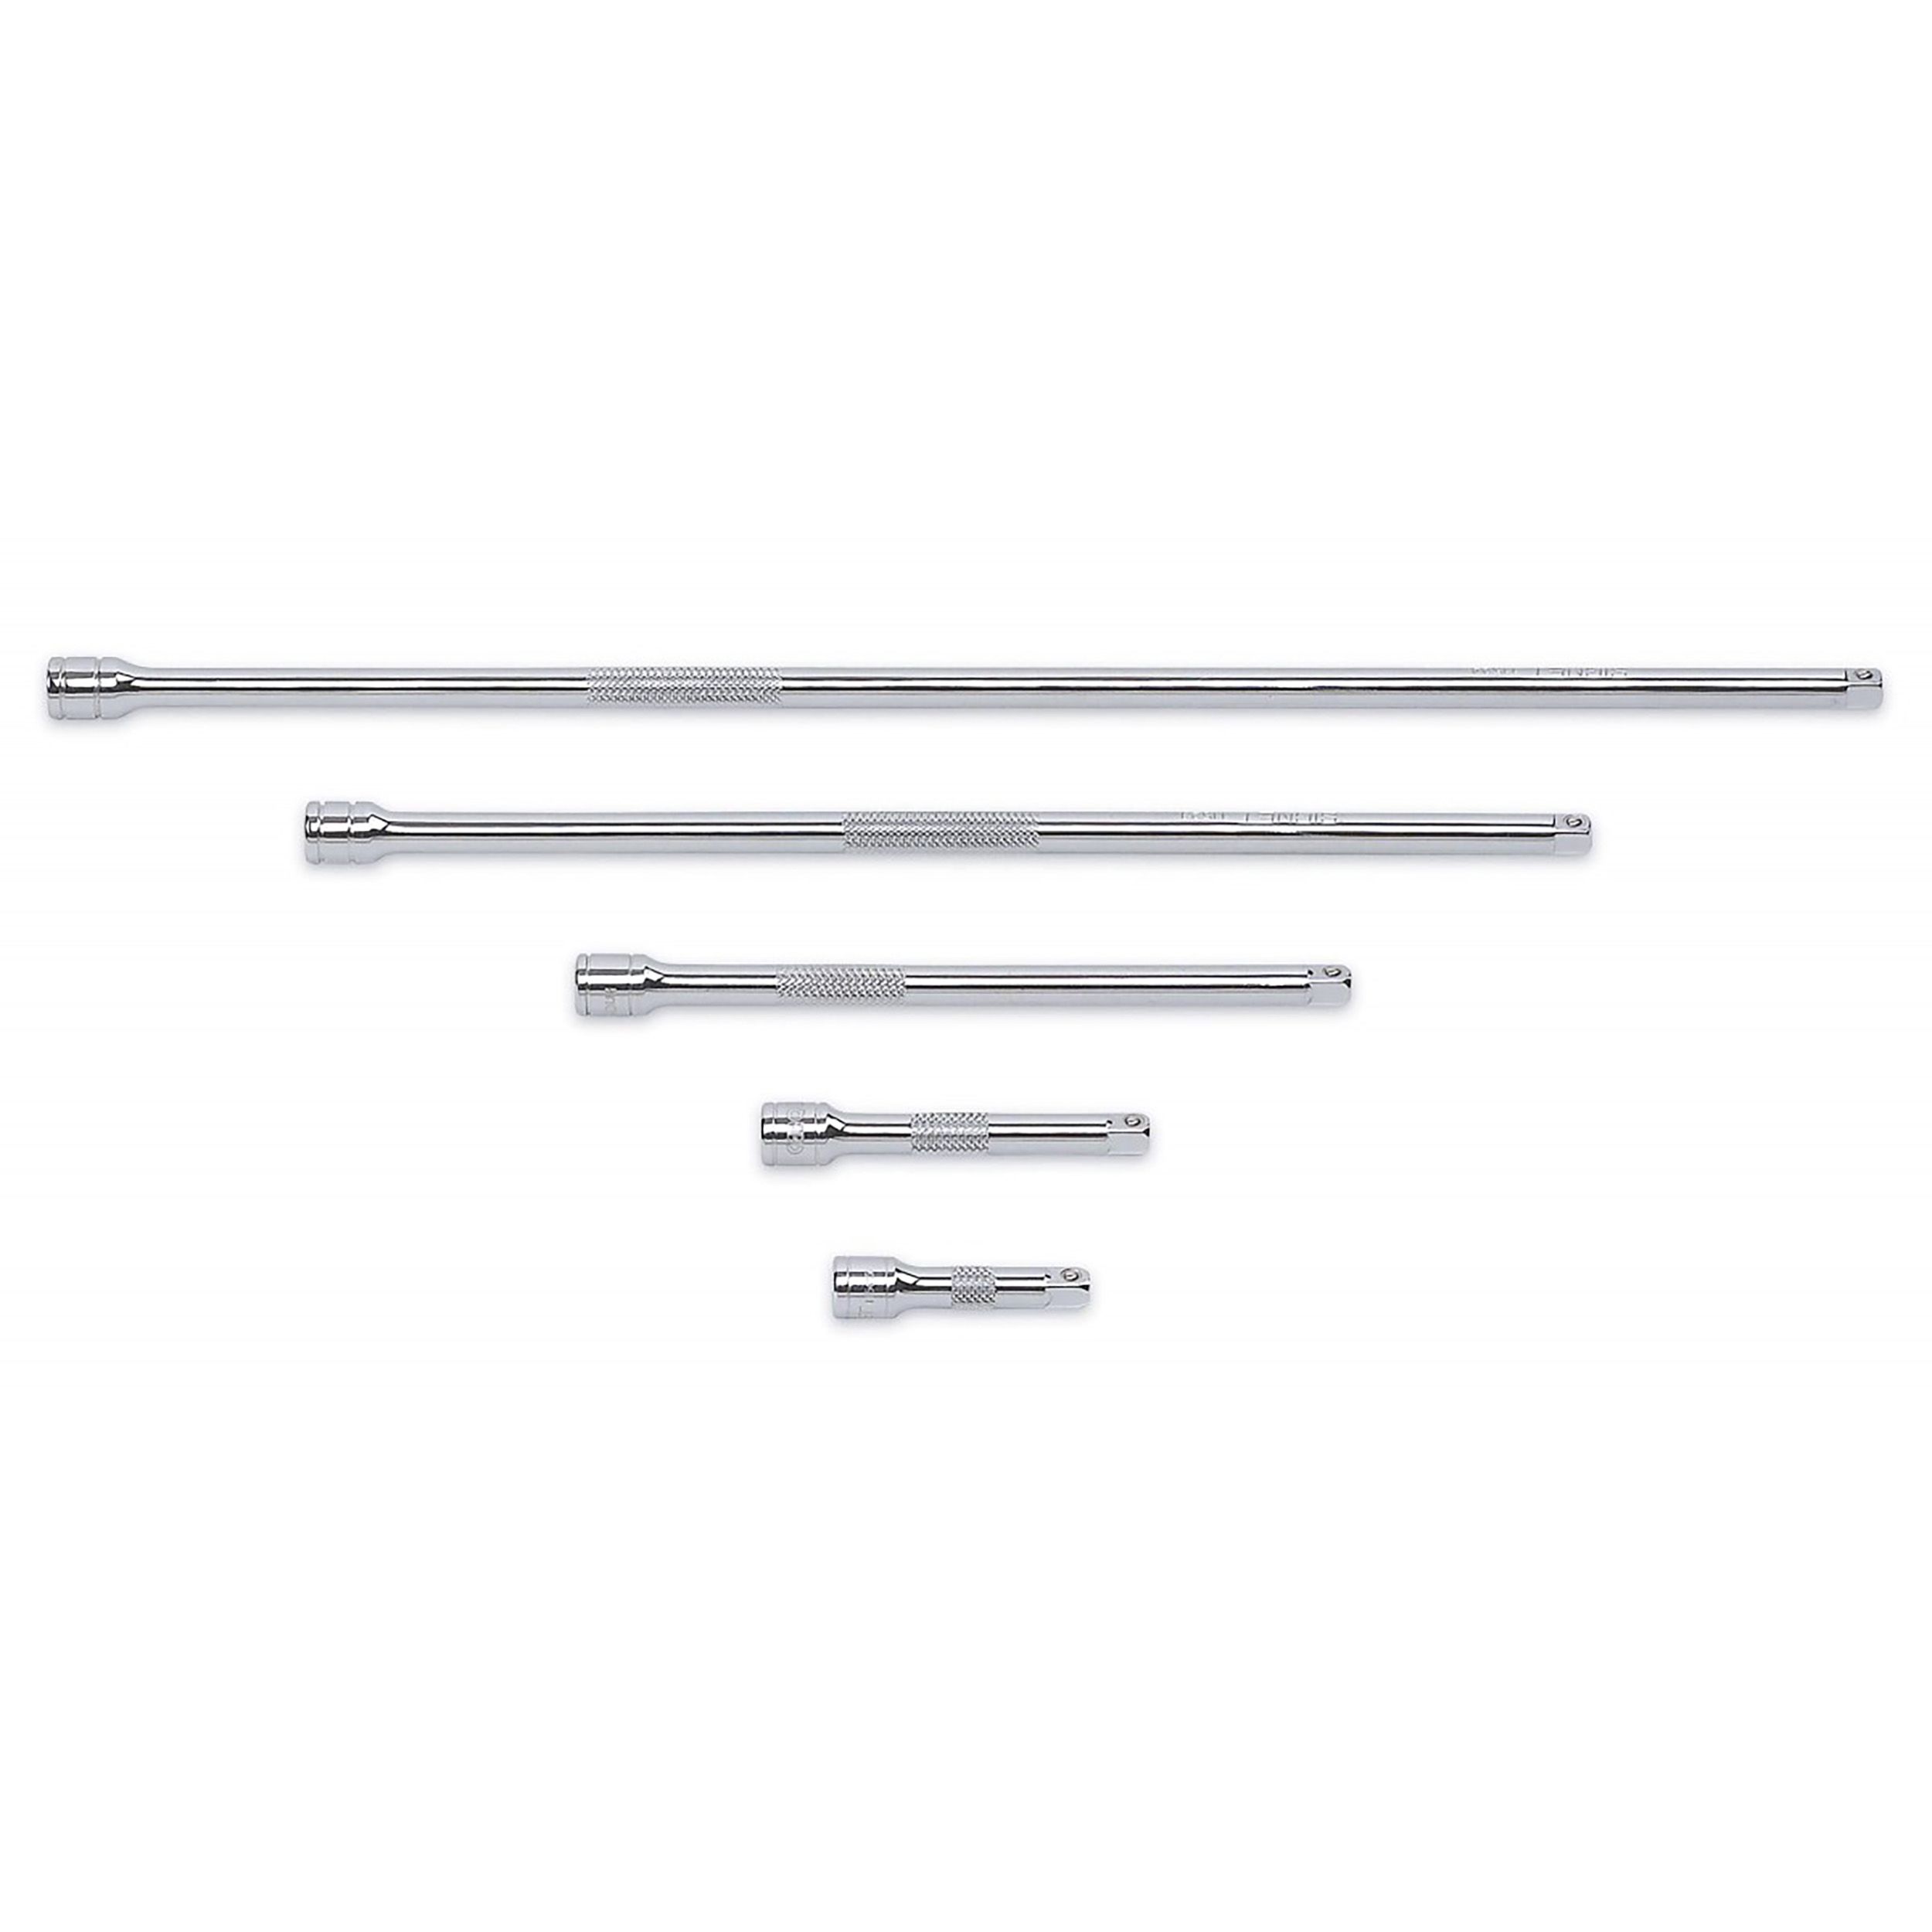 Gear Wrench 1/4 in Extension Set